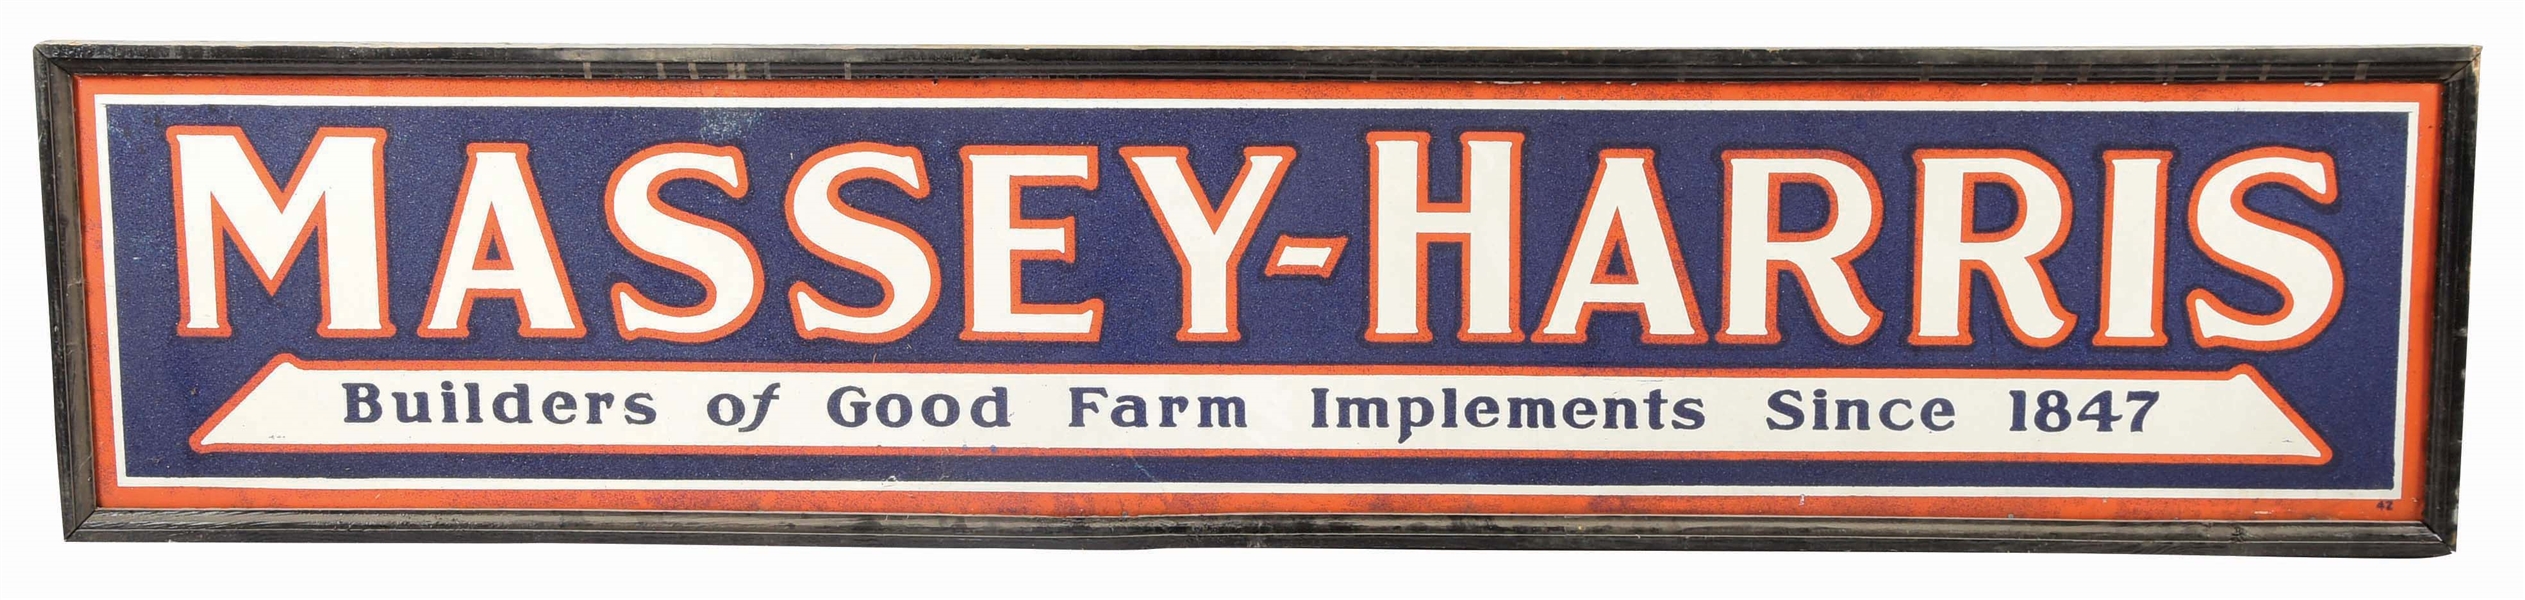 OUTSTANDING MASSEY HARRIS FARM IMPLEMENTS SMALTZ PAINTED TIN SIGN W/ WOOD FRAME. 